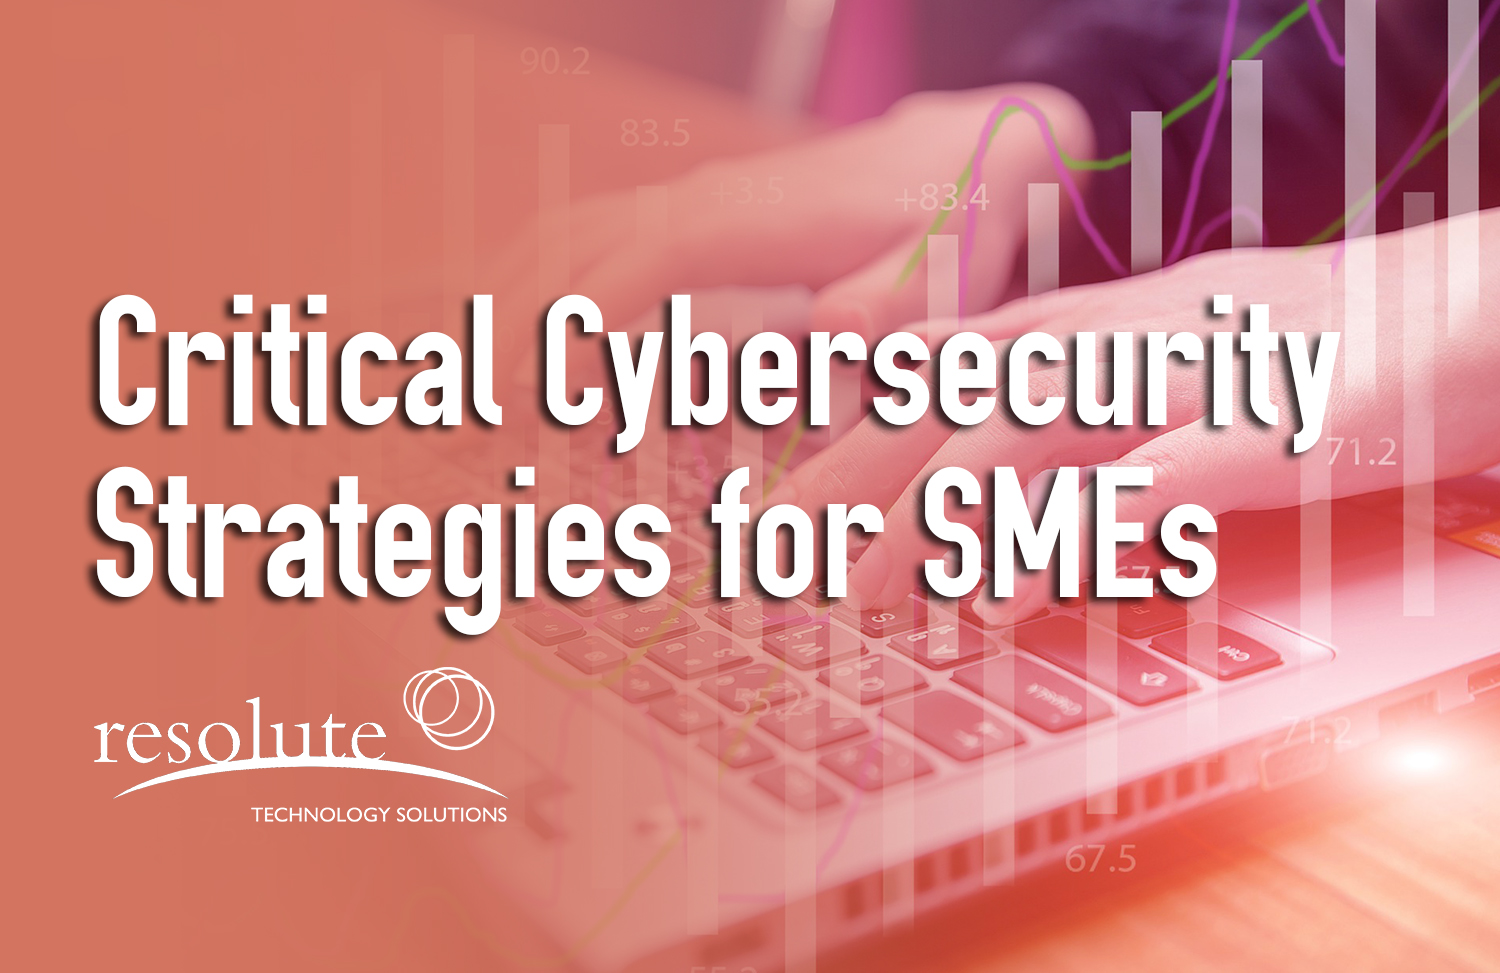 Critical Cybersecurity Strategies for SMEs